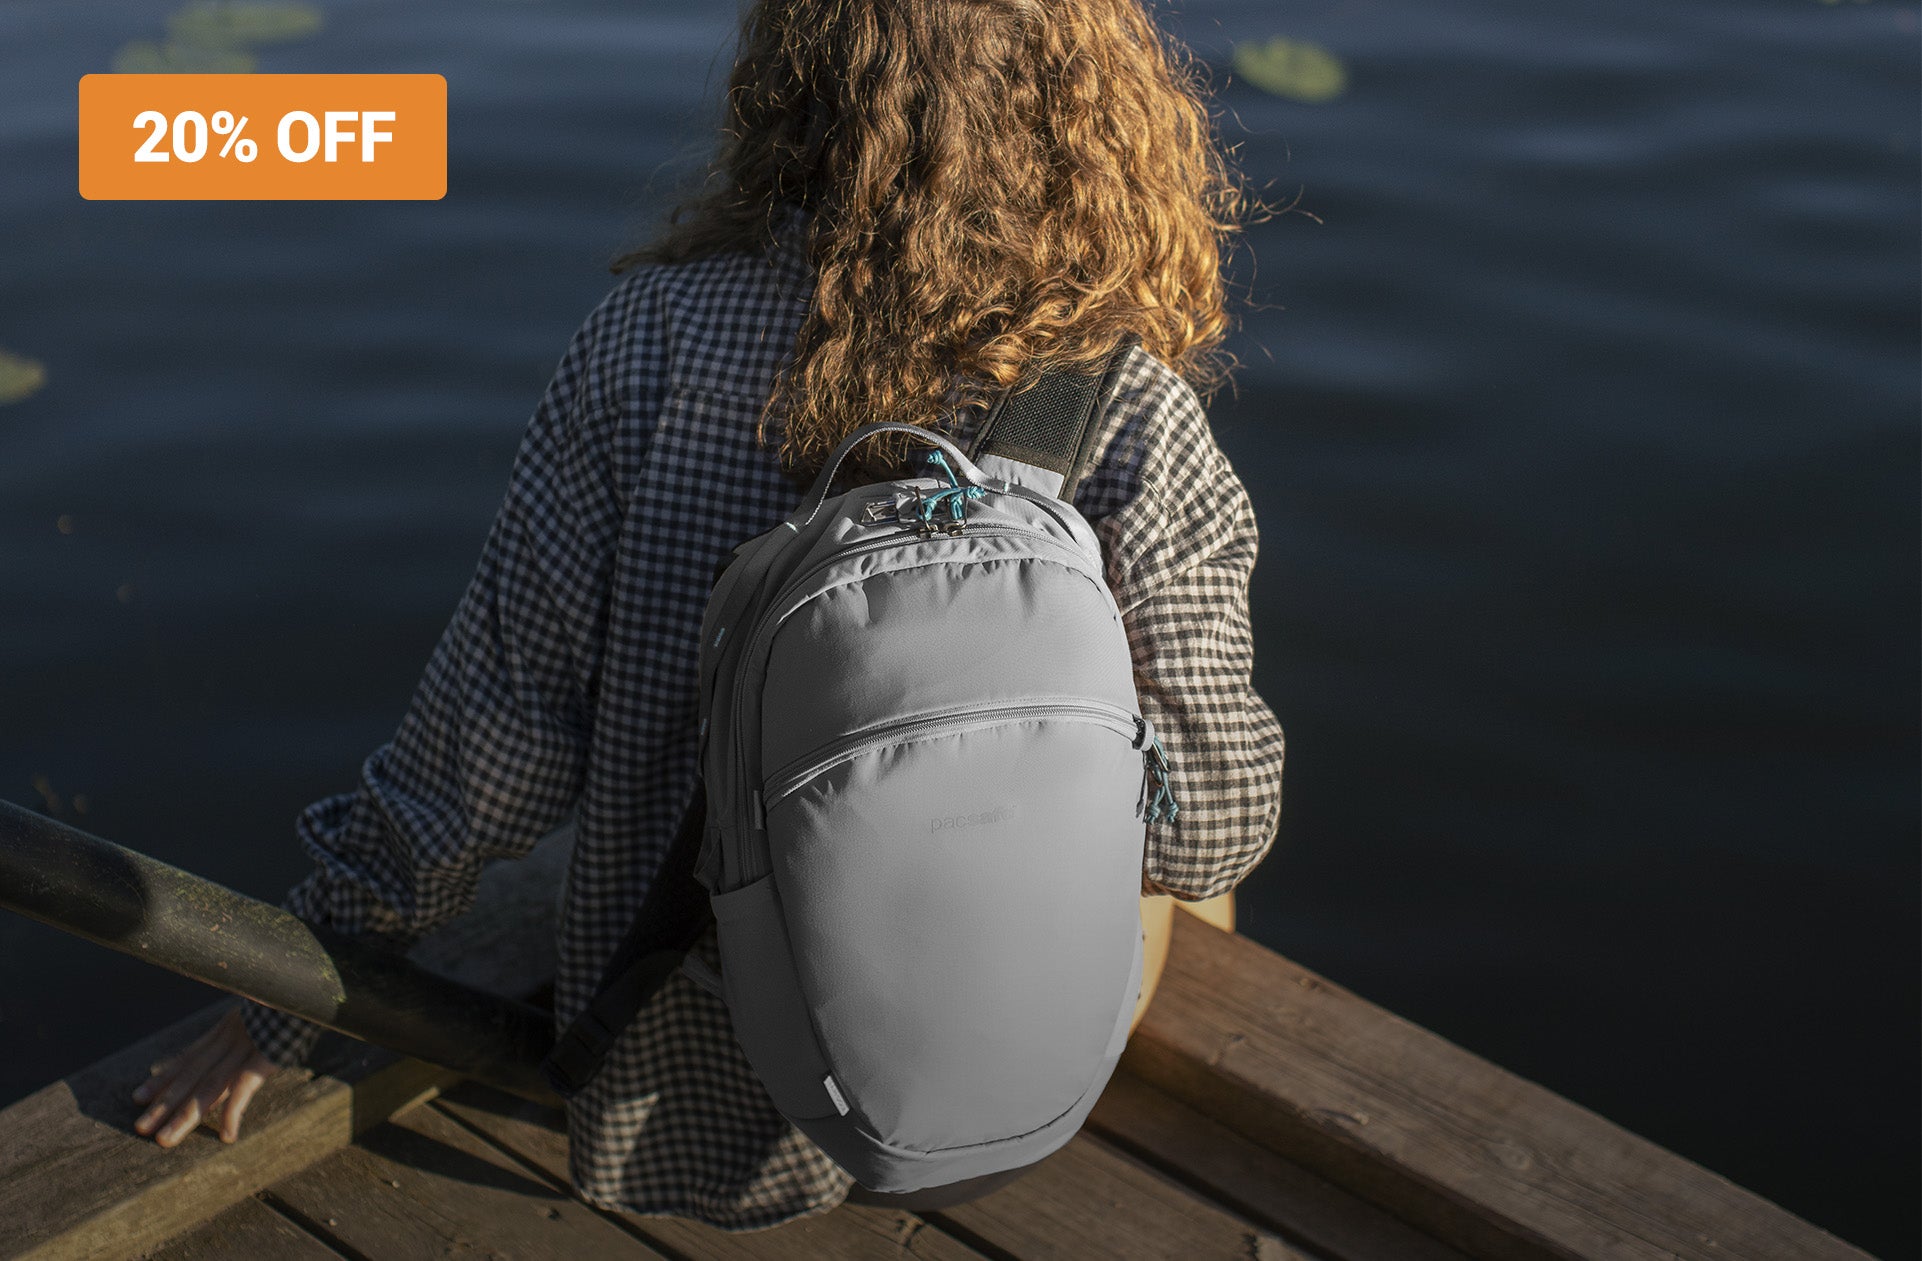 Pacsafe Official | Shop Online For Anti-Theft Backpacks & Travel Gear